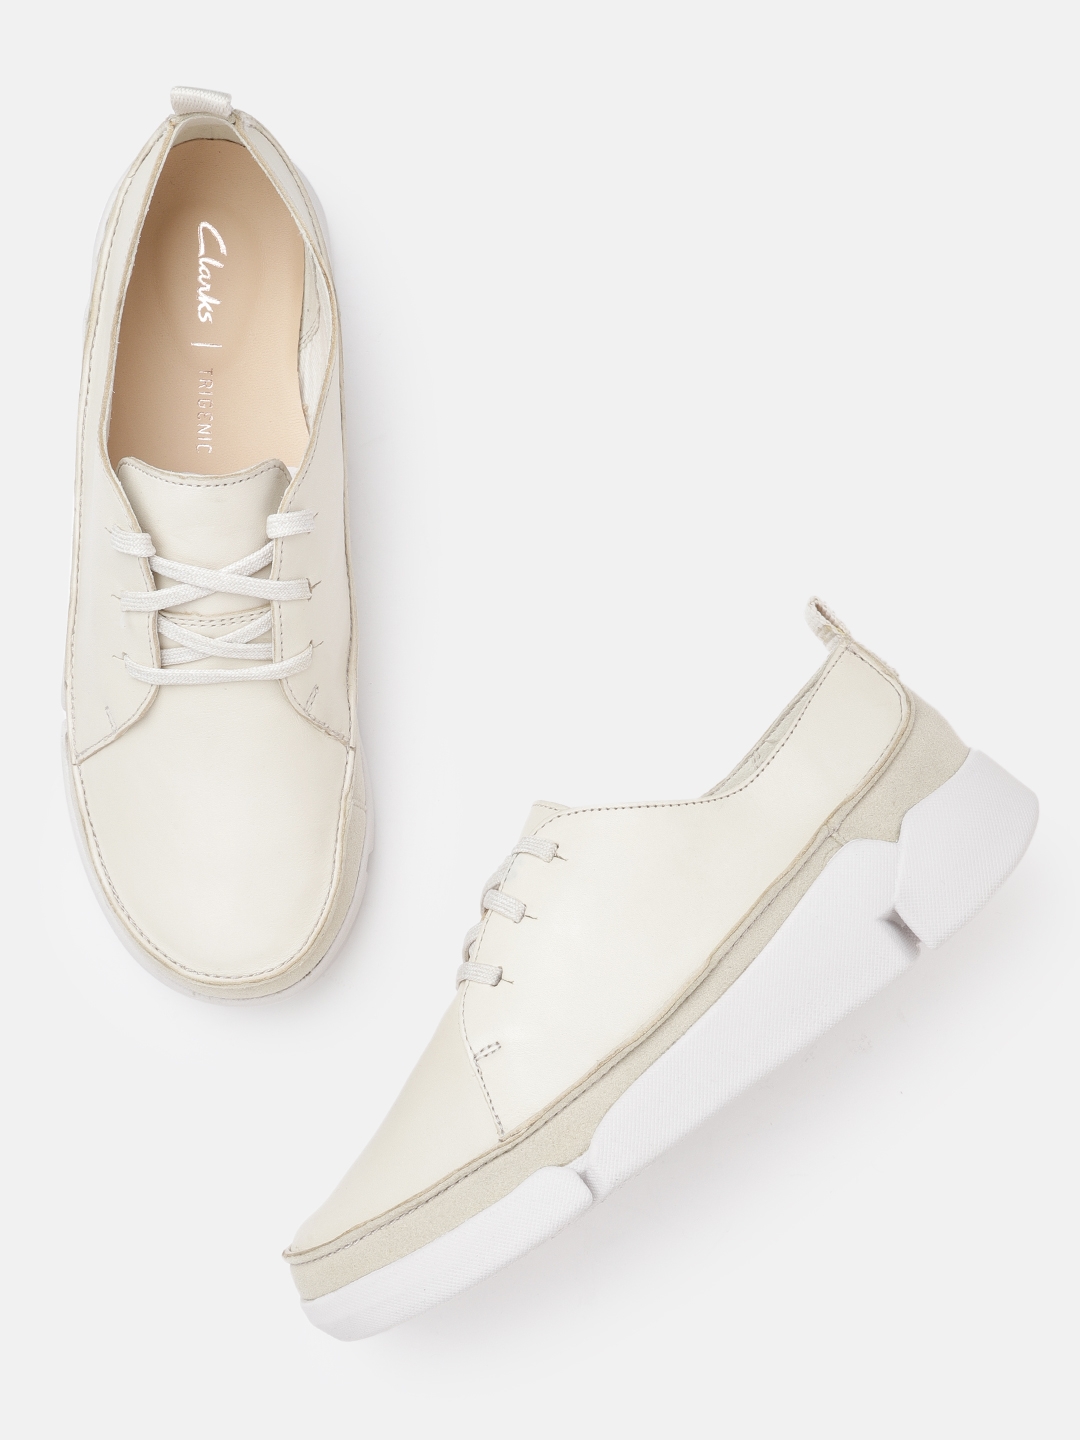 Clarks Women Off-White Leather Sneakers